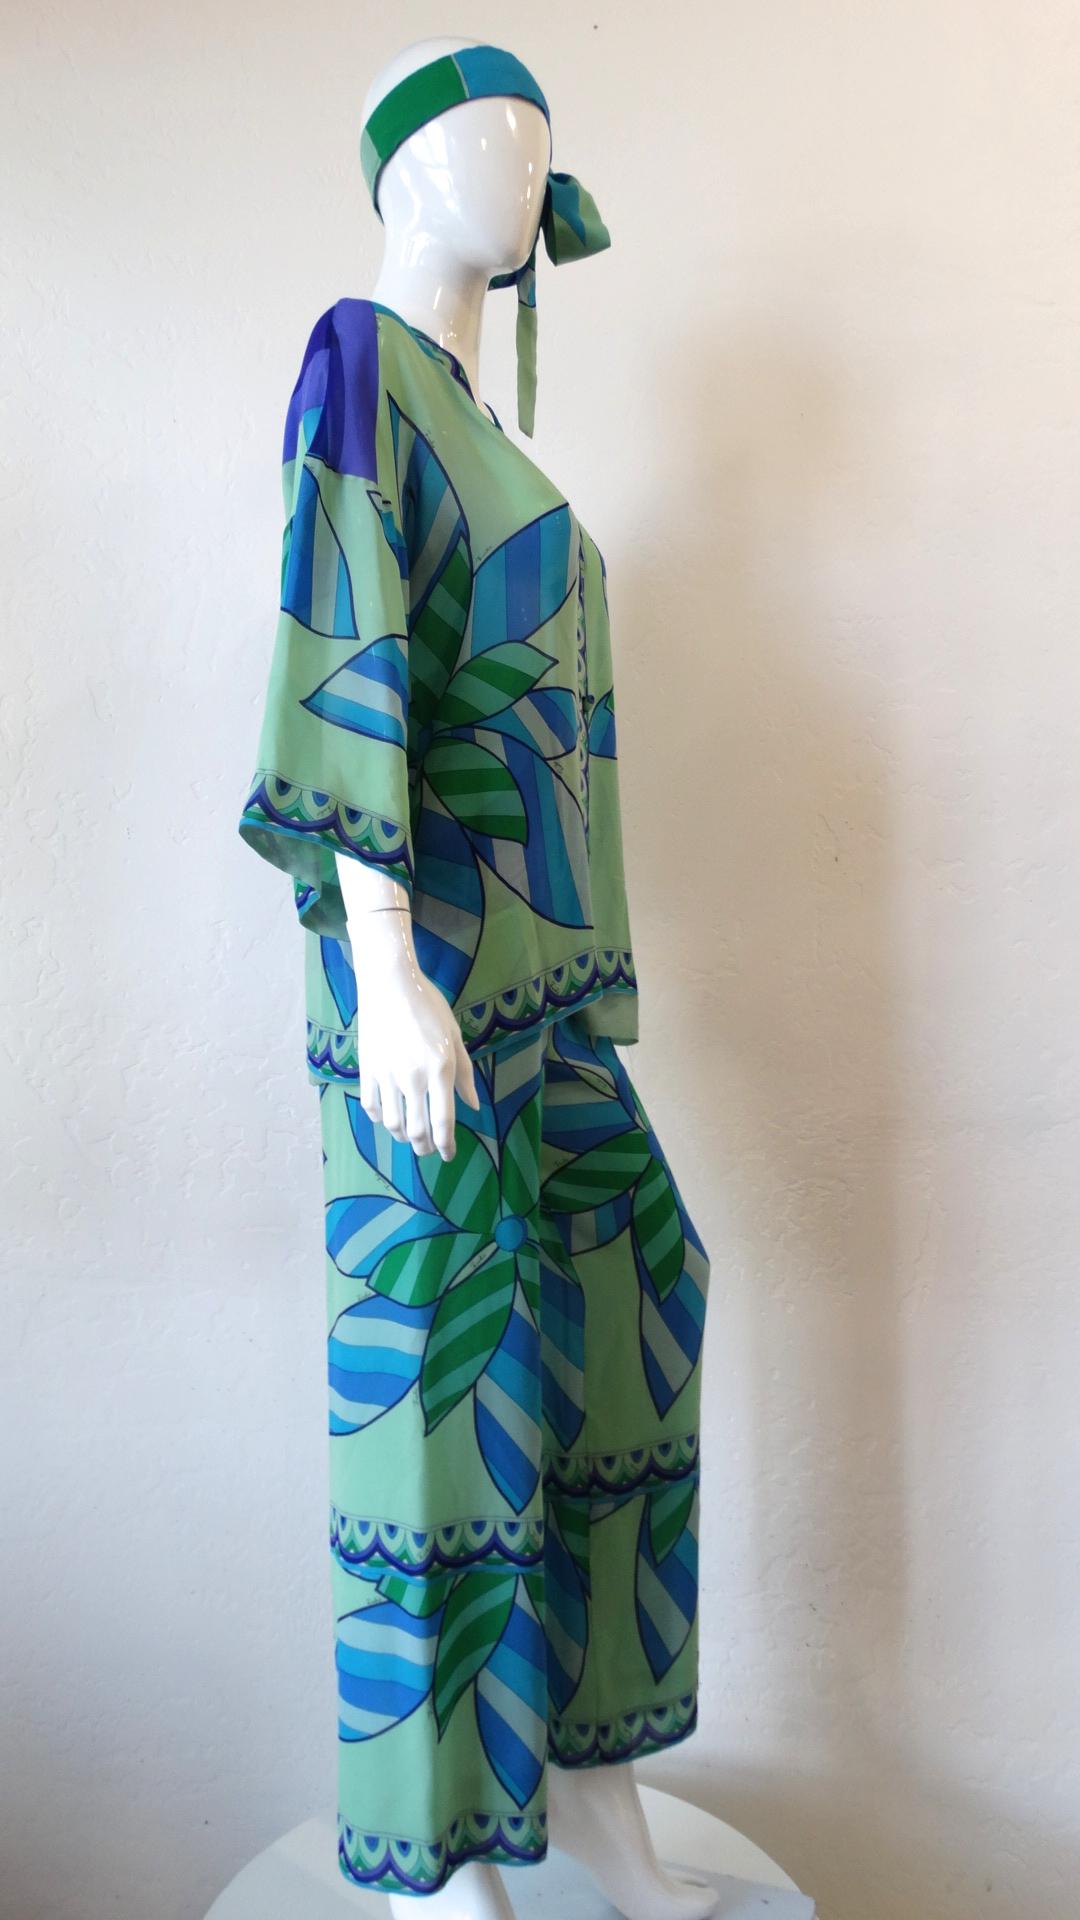 Emilio Pucci silk twill evening pajama in beautiful color way turquoise, blue hues and mint green with punches of purple, from the 1960s...Blouse top closes with buttons and a covered placket, round banded neckline and full 3/4 length sleeves...The